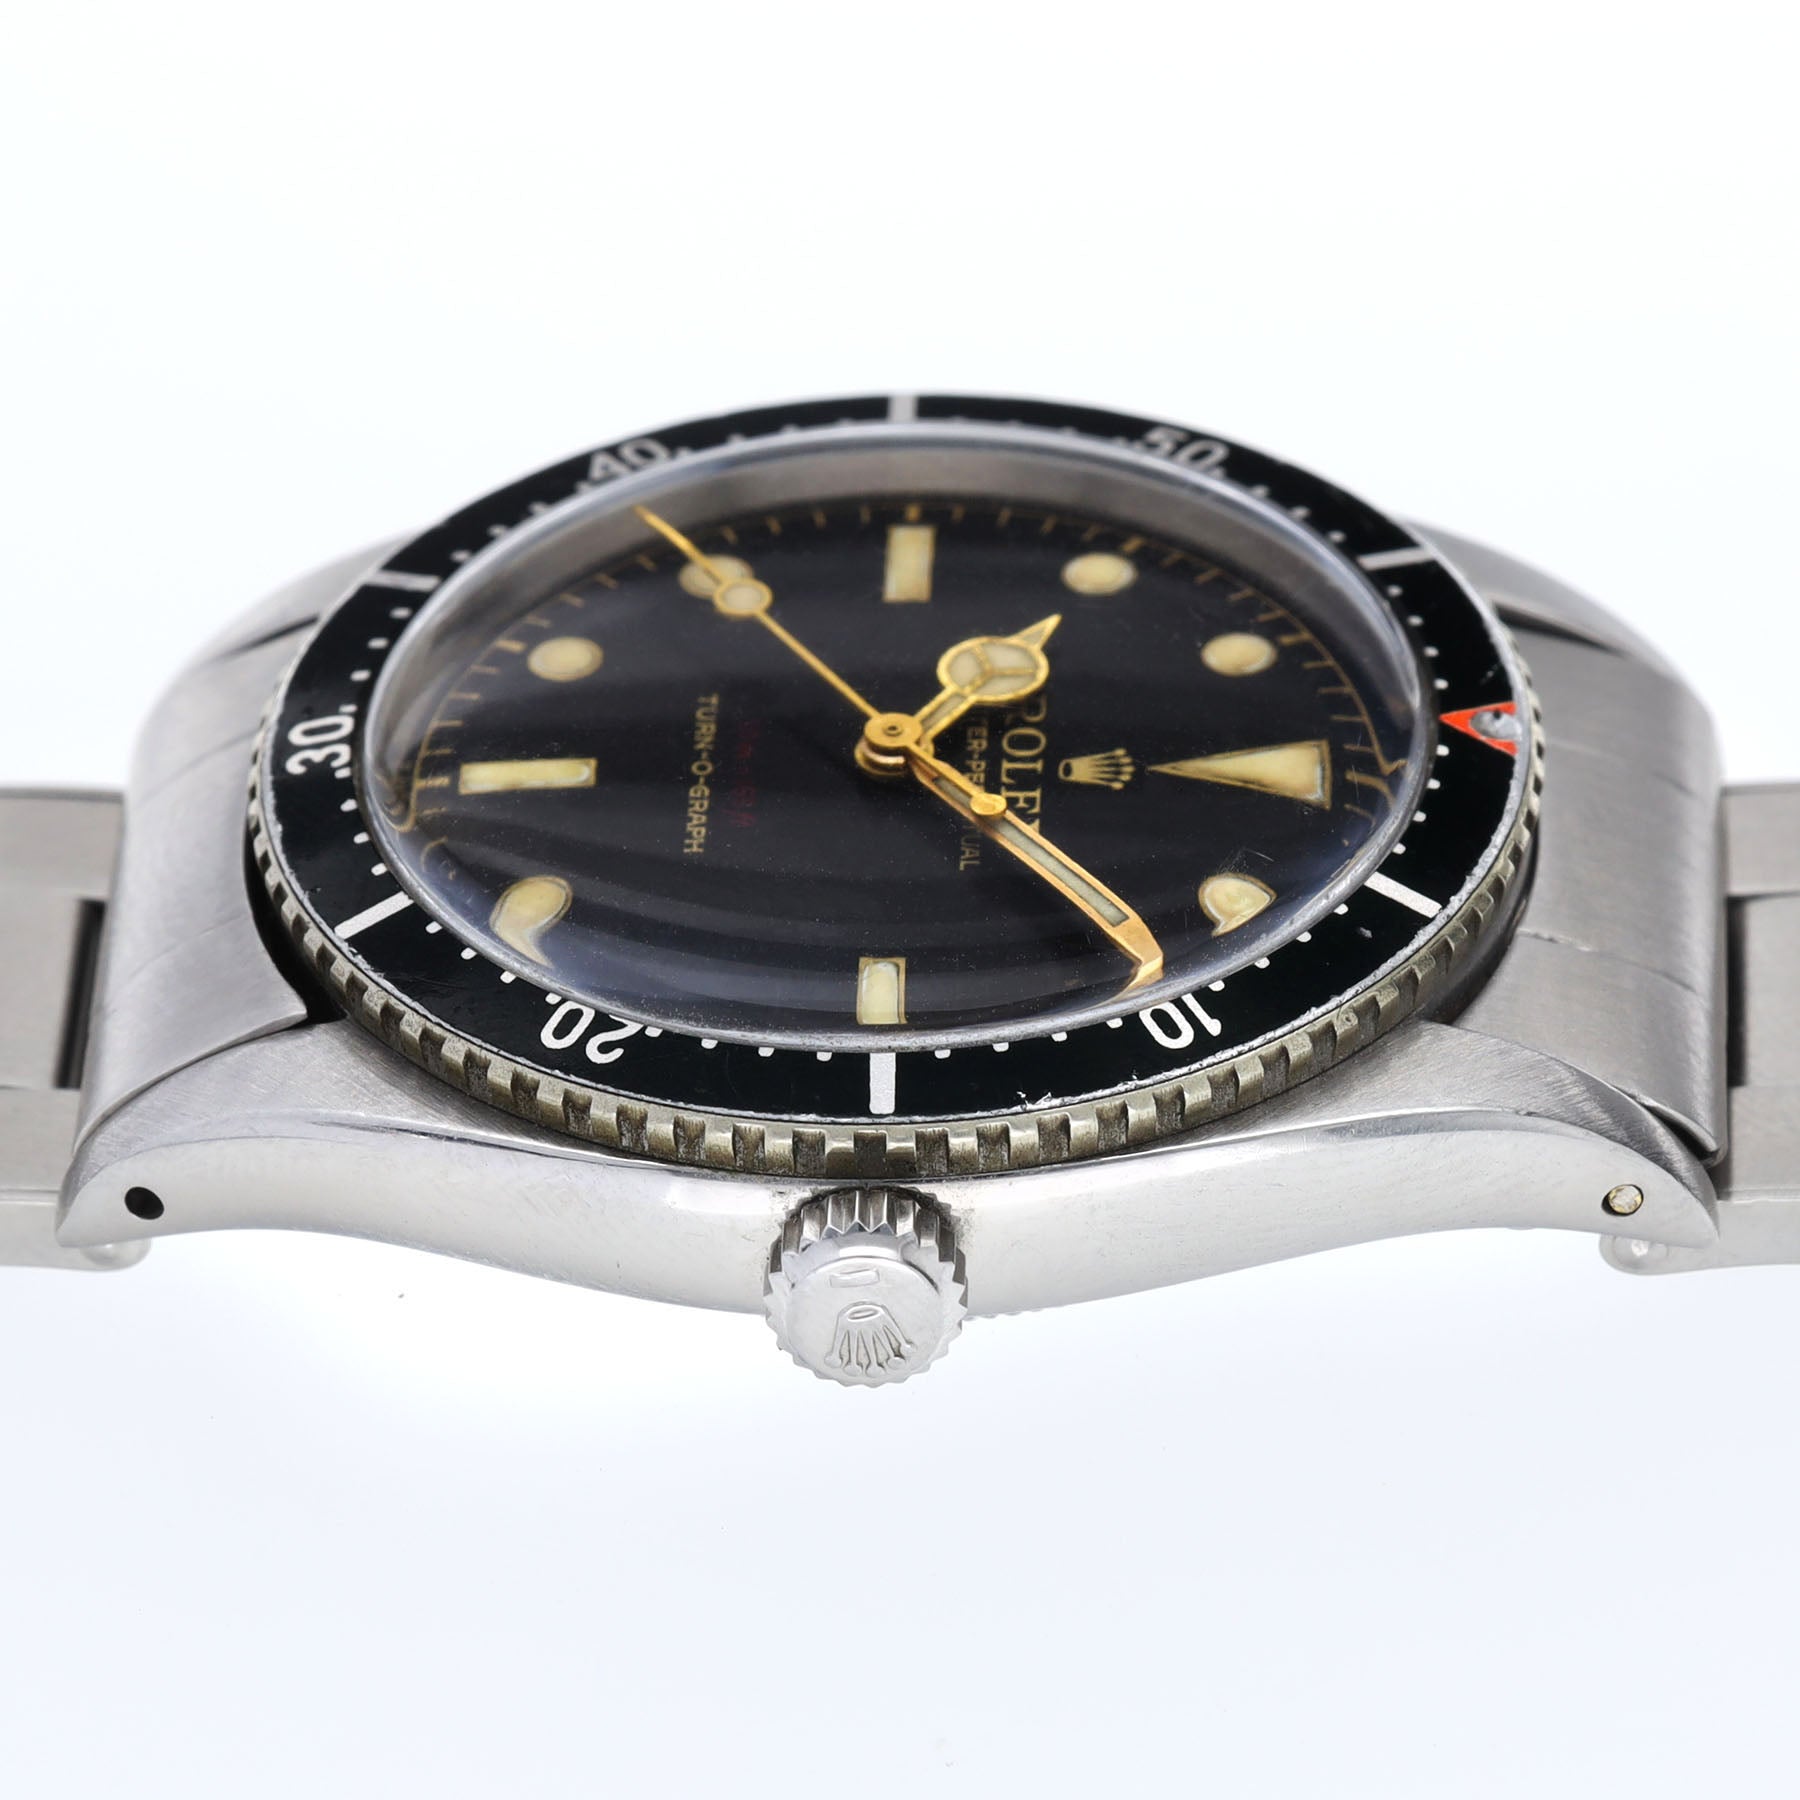 Rolex Turn-O-Graph 6202 Gilt Dial Red Depth Red Triangle Bezel